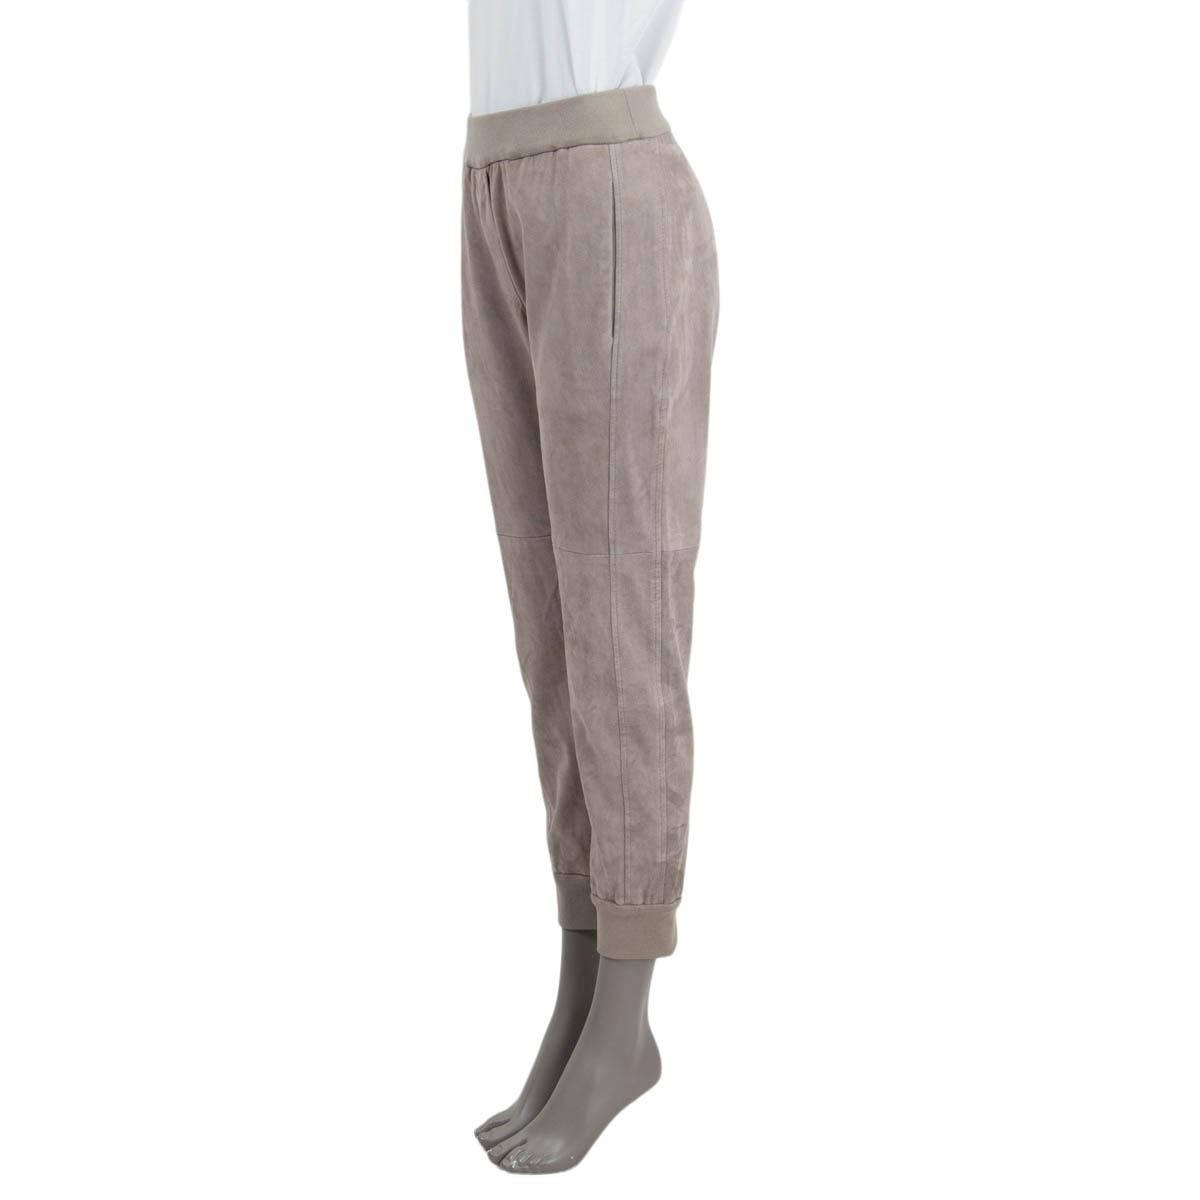 100% authentic Brunello Cucinelli jogger pants in gray suede (100%). Feature two slit pockets on the side, an elastic waist band and elastic cuffs. Unlined. Have been worn once or twice and are in virtually new condition.

Measurements
Tag